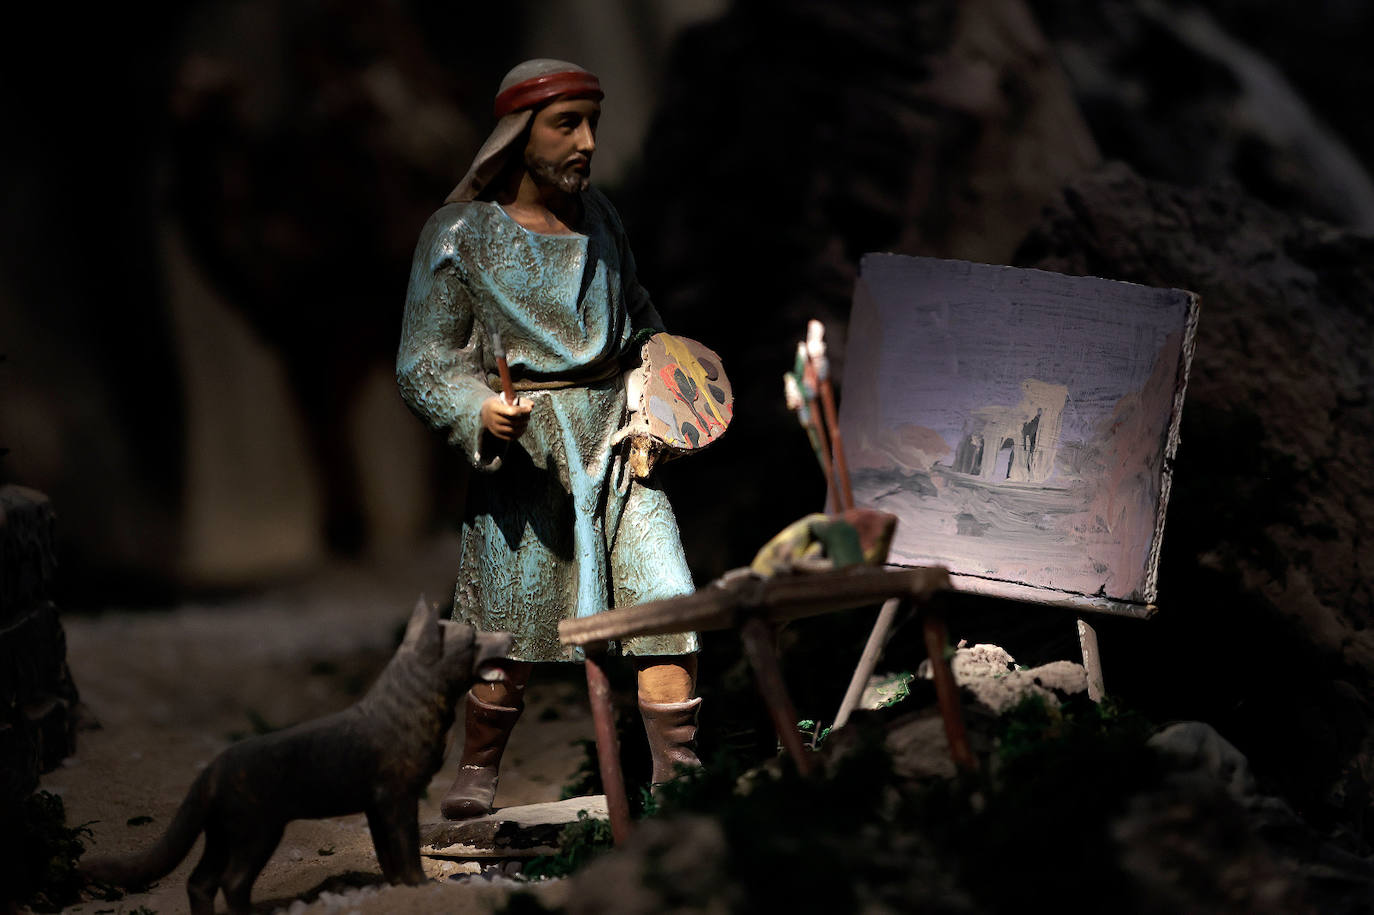 Malaga city hall brightens up Christmas with its huge nativity display, in pictures